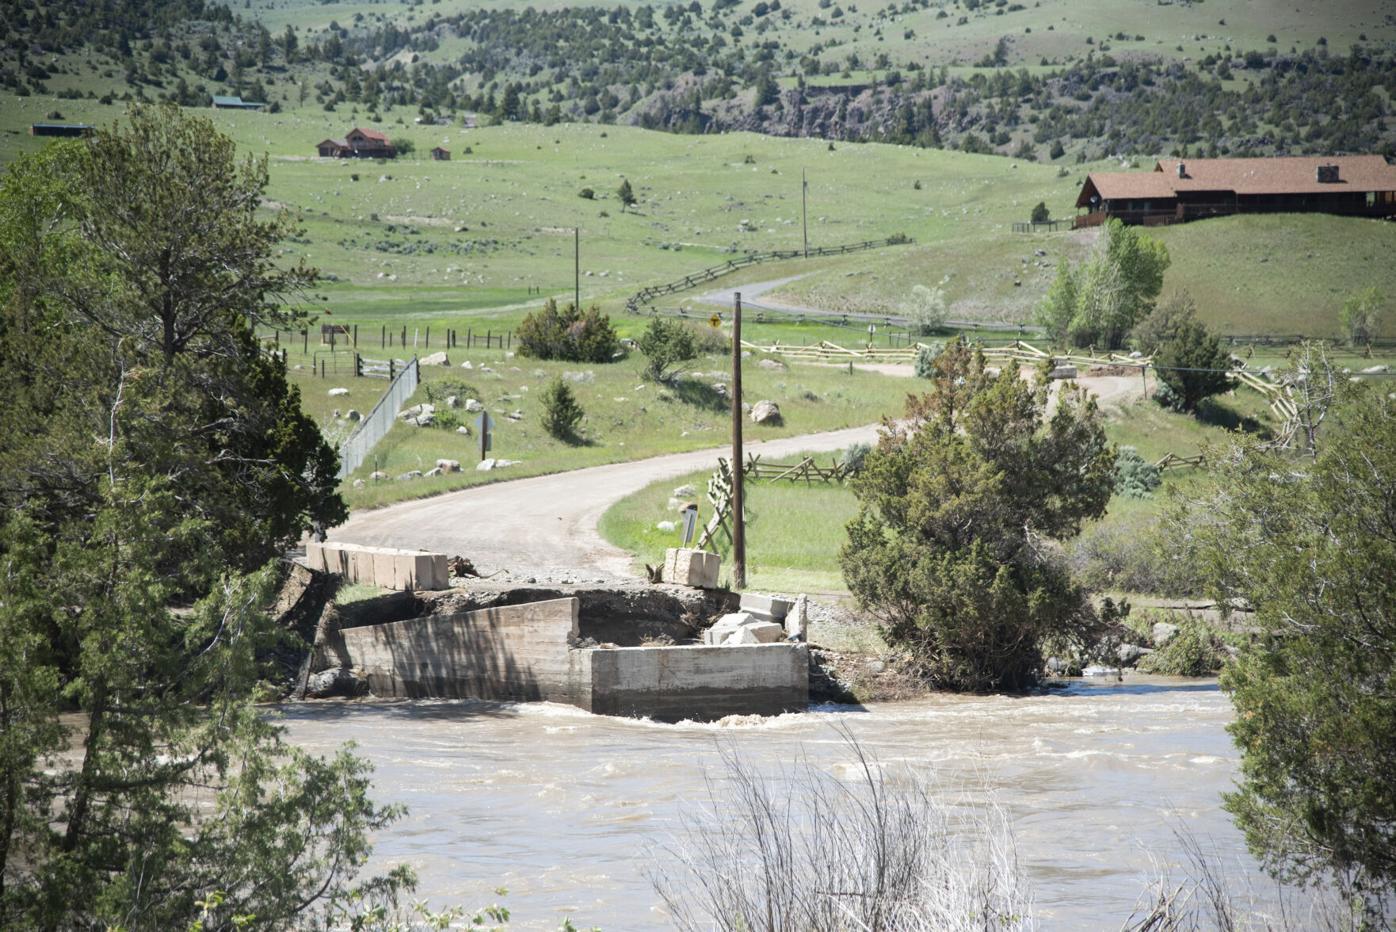 Now this is real': Inside the initial response to flooding in Park County, Environment